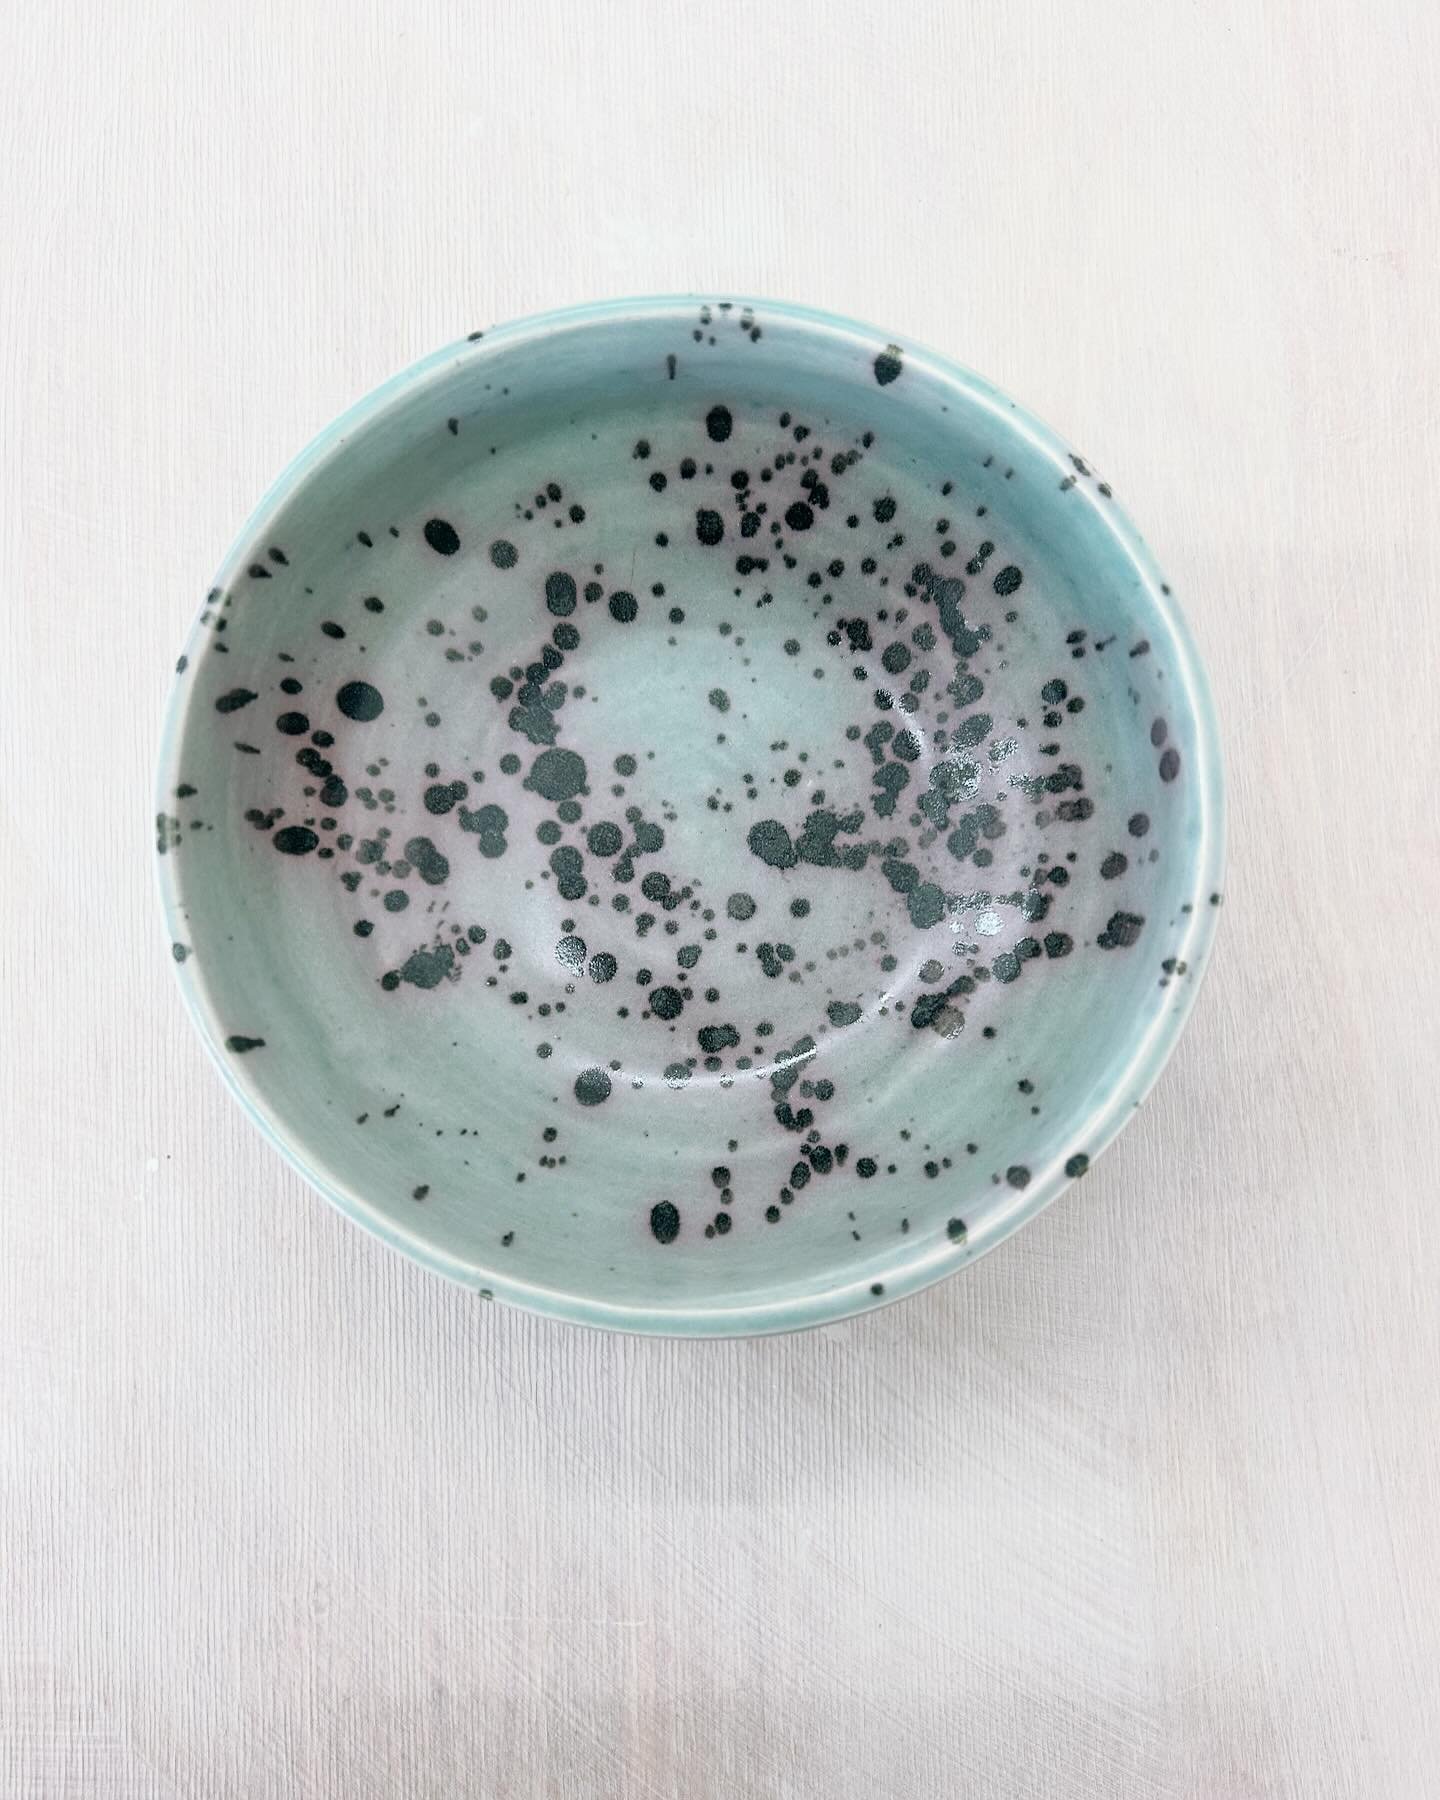 Totally obsessed with this cosmic bowl 🪐

The Glazing reminds me of fantasy constellations 😁. 

just need to upload this to my website and call-in it&rsquo;s new home ☺️

You can check out what&rsquo;s available right now at:

Joannaingramceramics.